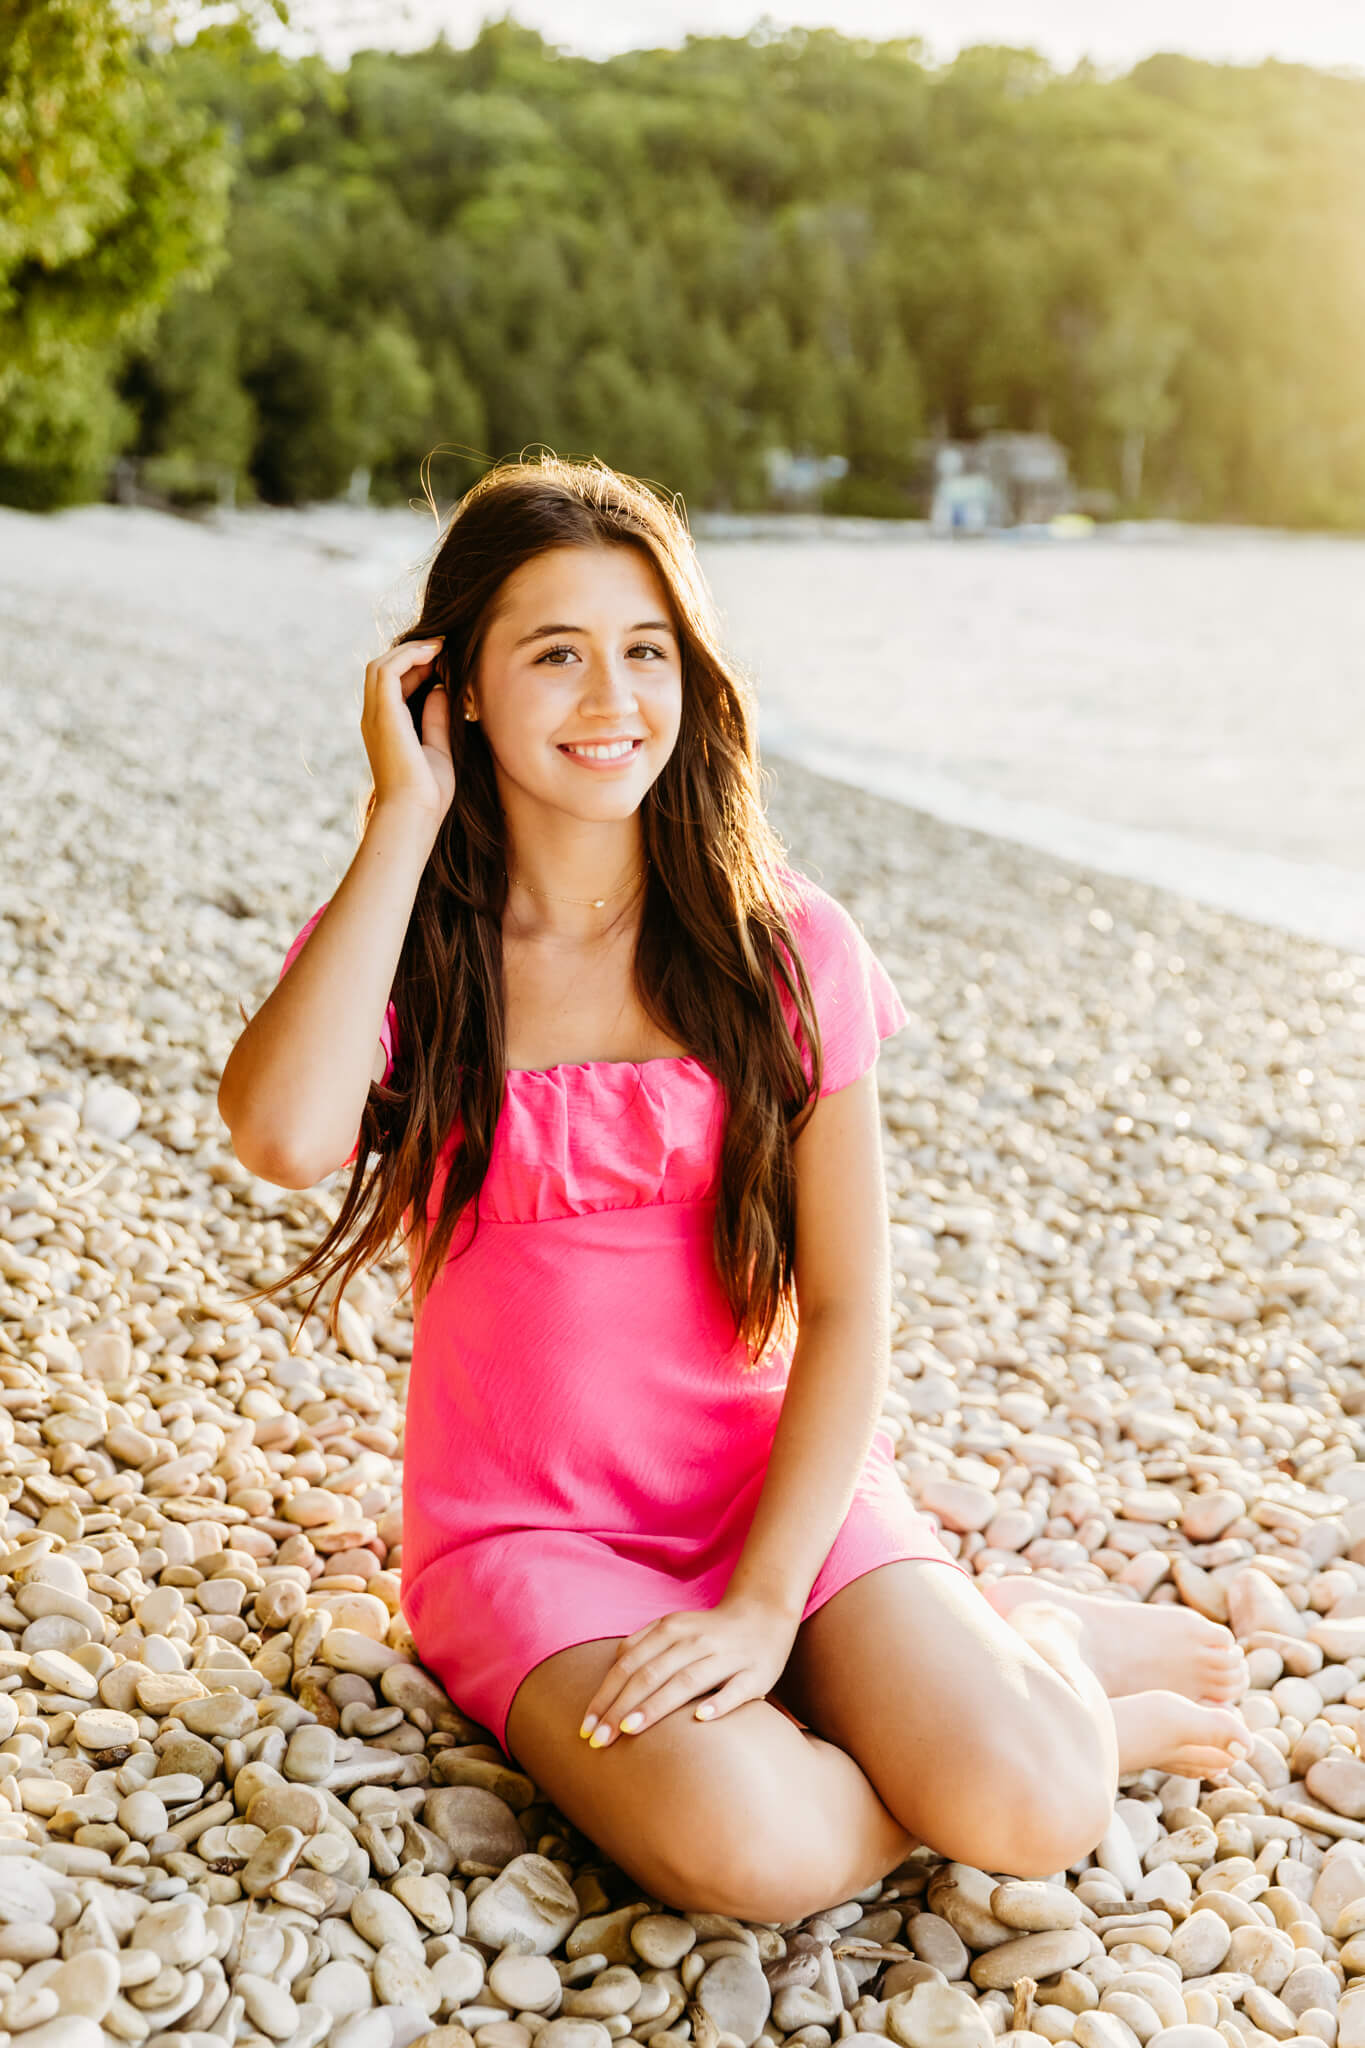 stunning teen girl in a bright pink dress tucking her hair behind her ears as she sits on a rocky beach for a blog post about Styled by Sharon